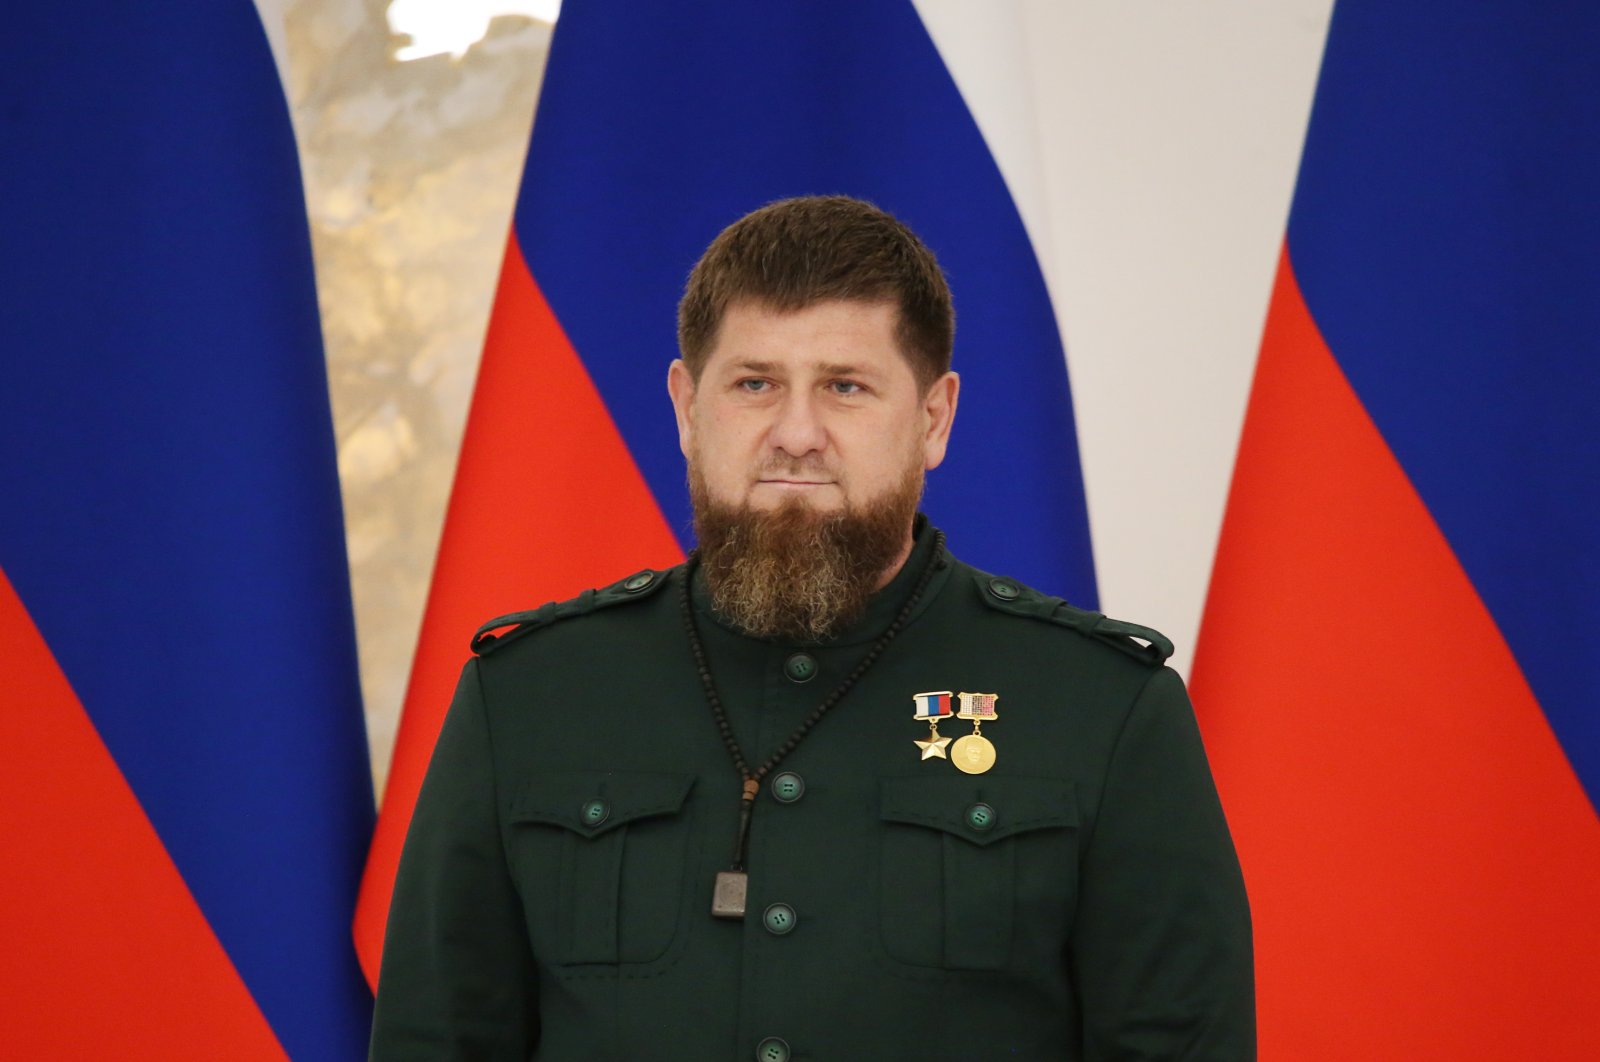 Chechen leader Ramzan Kadyrov attends an inauguration ceremony in Grozny, Russia, Oct. 5, 2021. (Reuters File Photo)